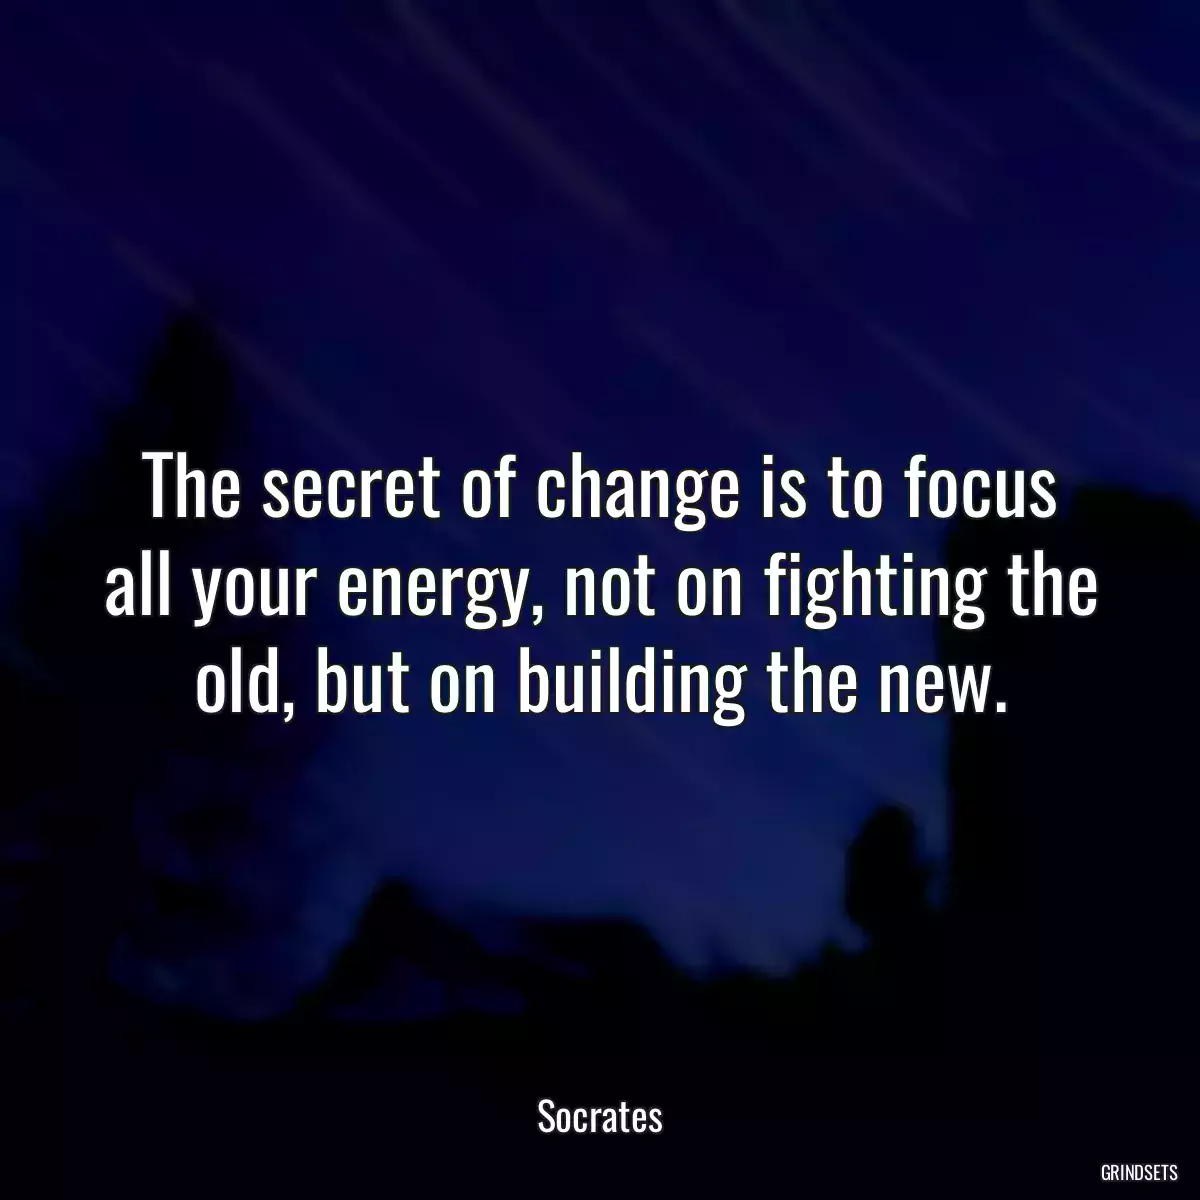 The secret of change is to focus all your energy, not on fighting the old, but on building the new.